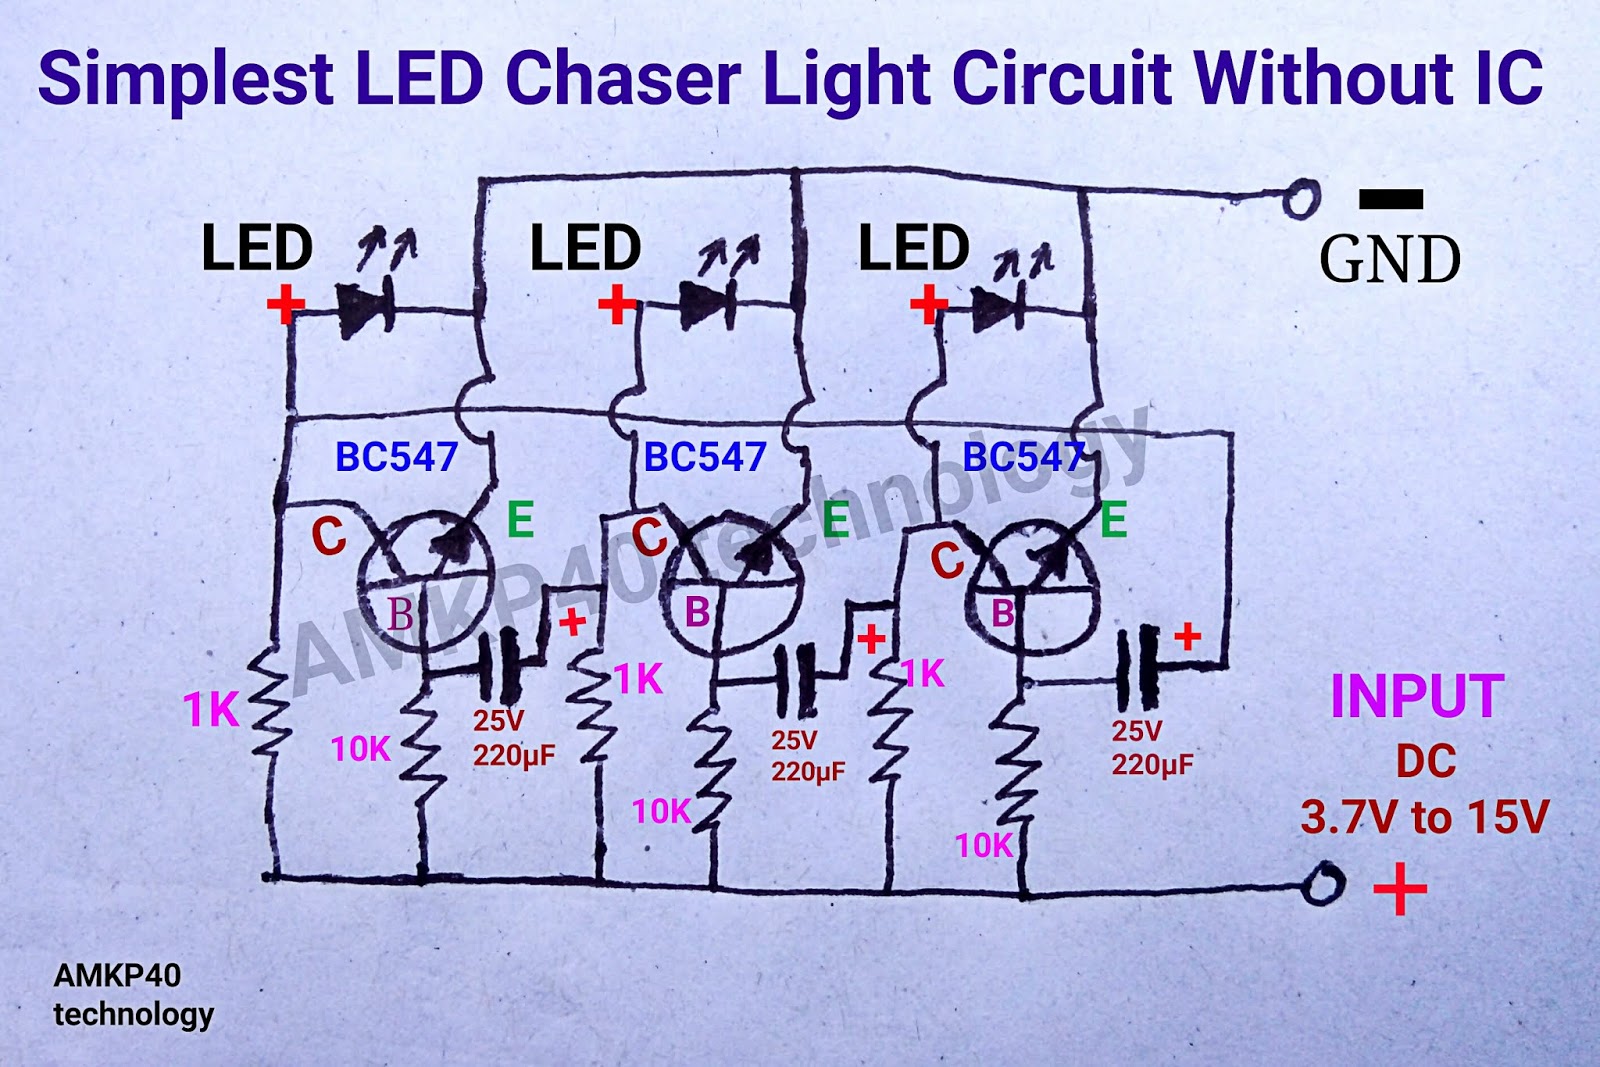 Simplest 12V LED Chaser Light Without IC Circuit Diagram